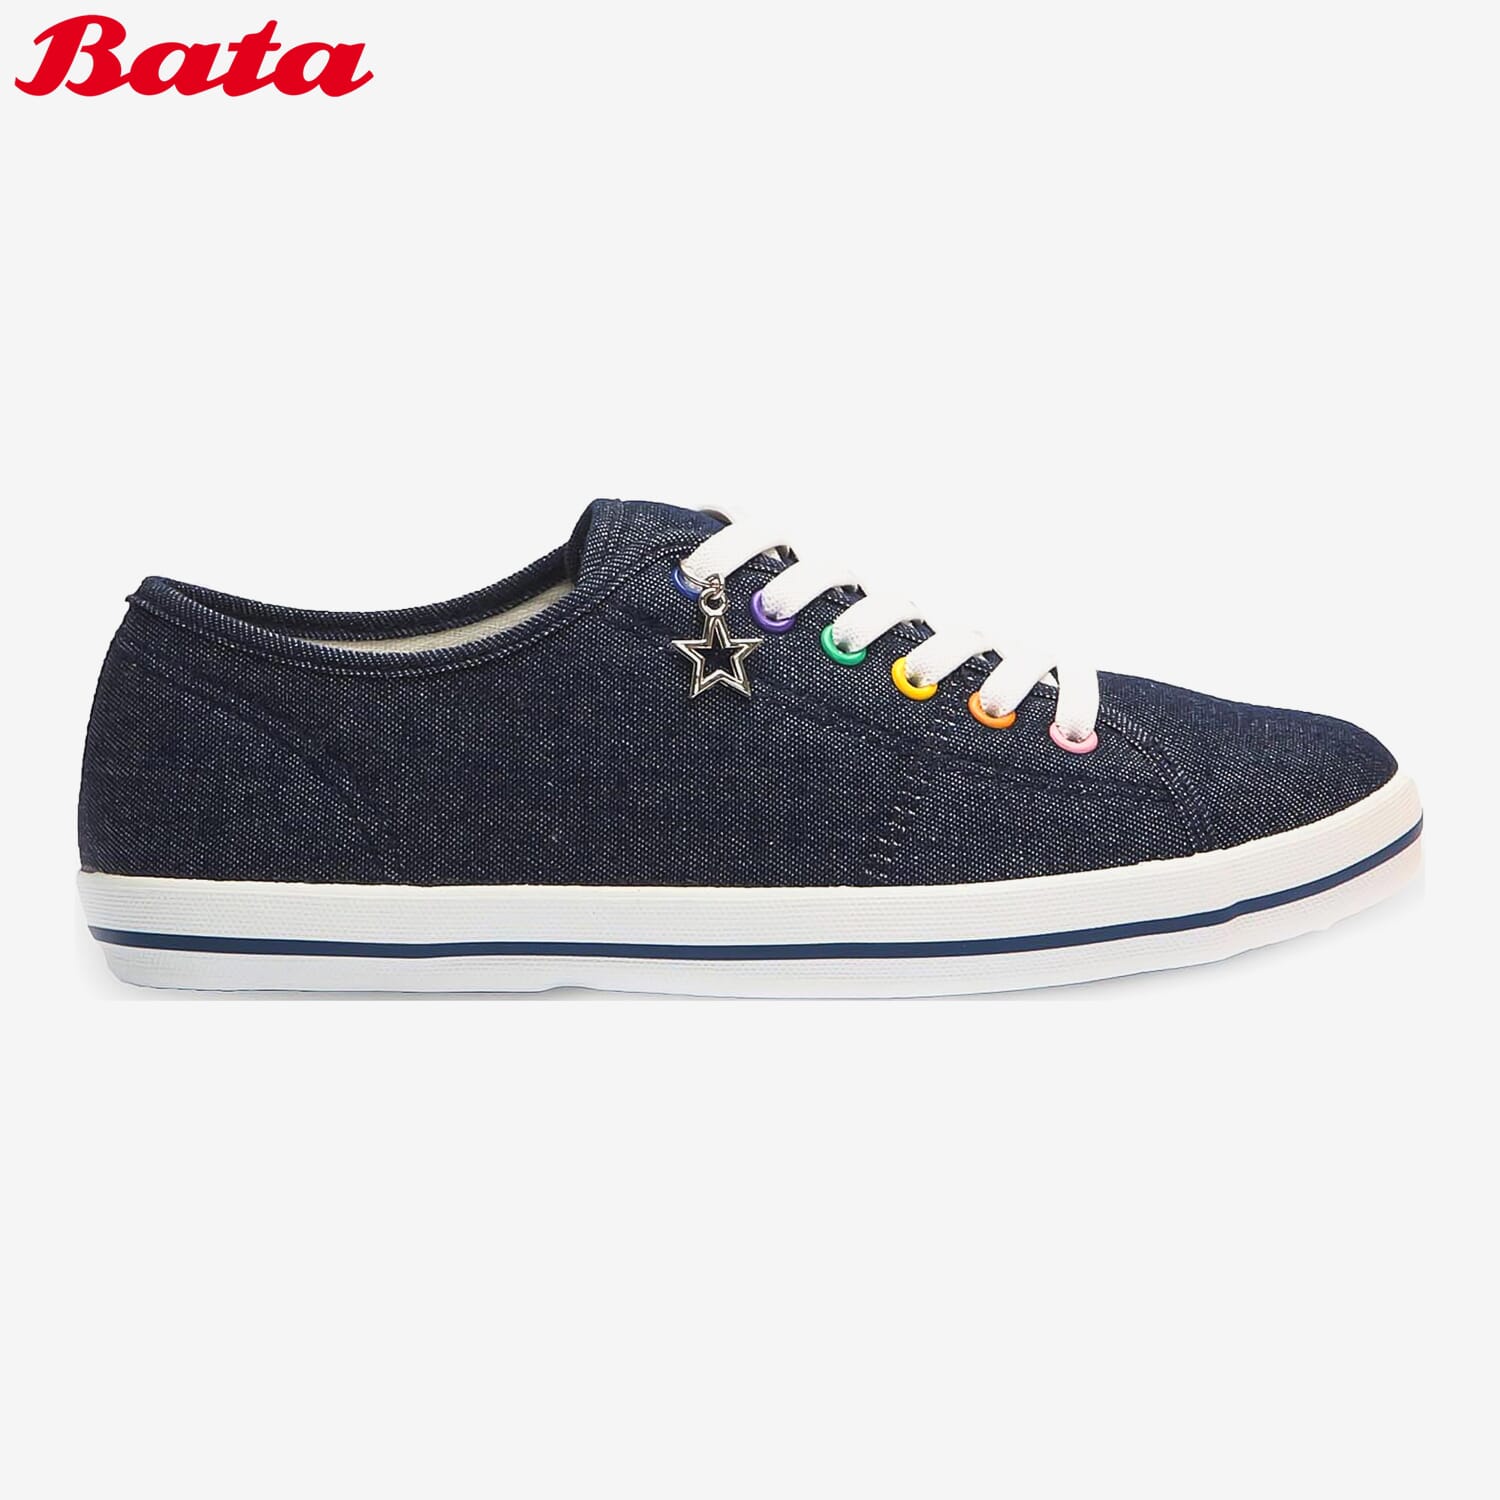 Bata Industrials - Curve safety shoes are especially made for women. This  sportive ladies safety shoe is S1P, Full Metal Free, has an antislip rubber  outsole and is ideal for use in